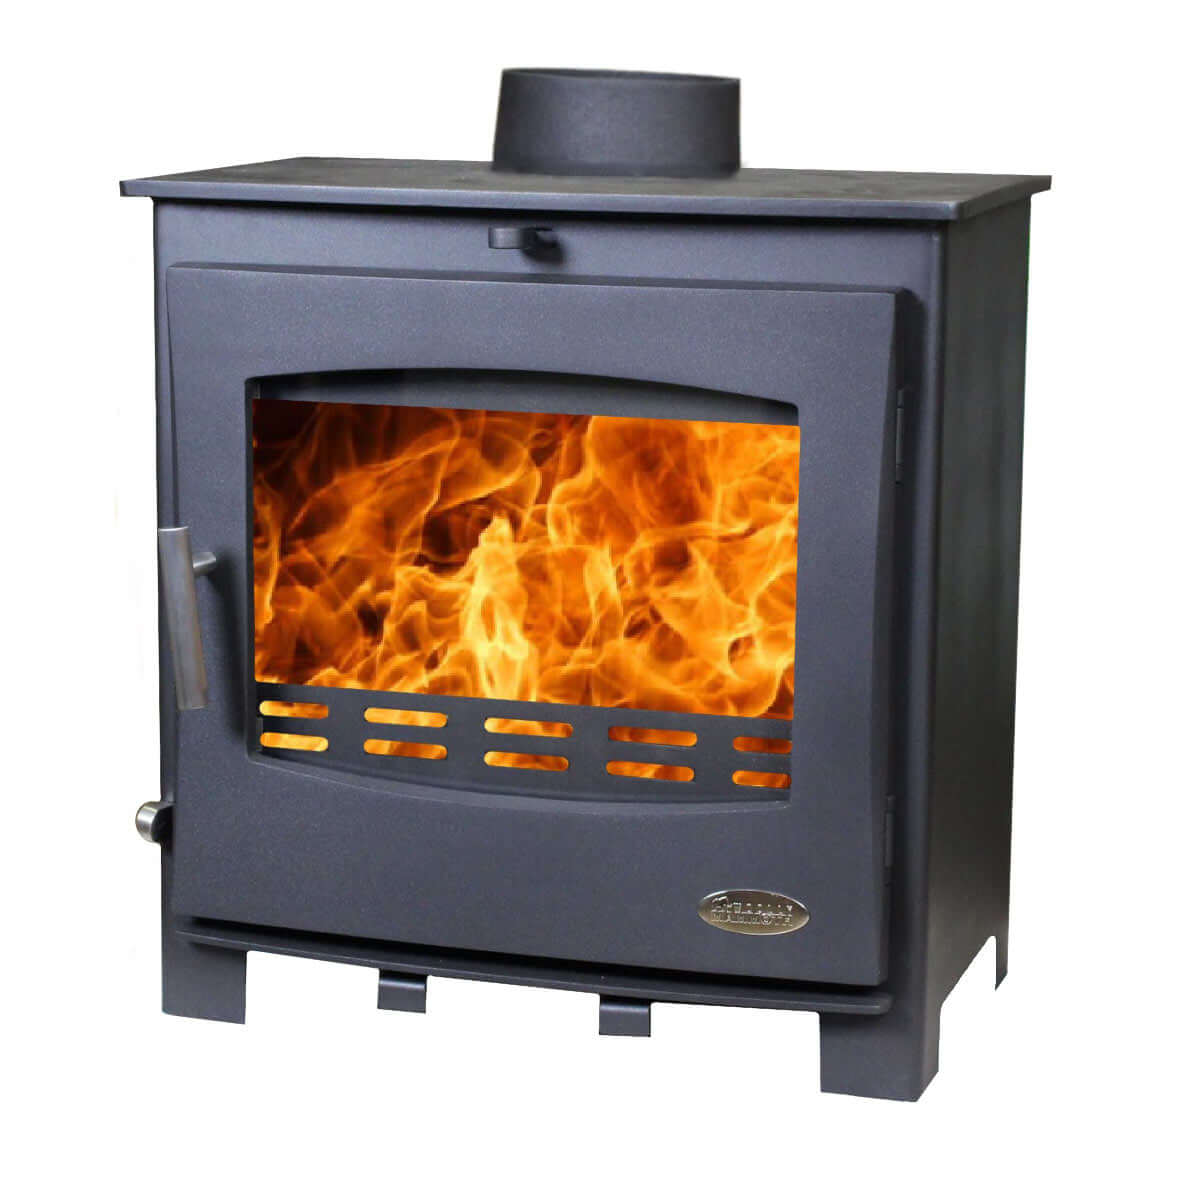 Woolly Mammoth 5 Widescreen Mk2 Multifuel Stove - Glowing Flame